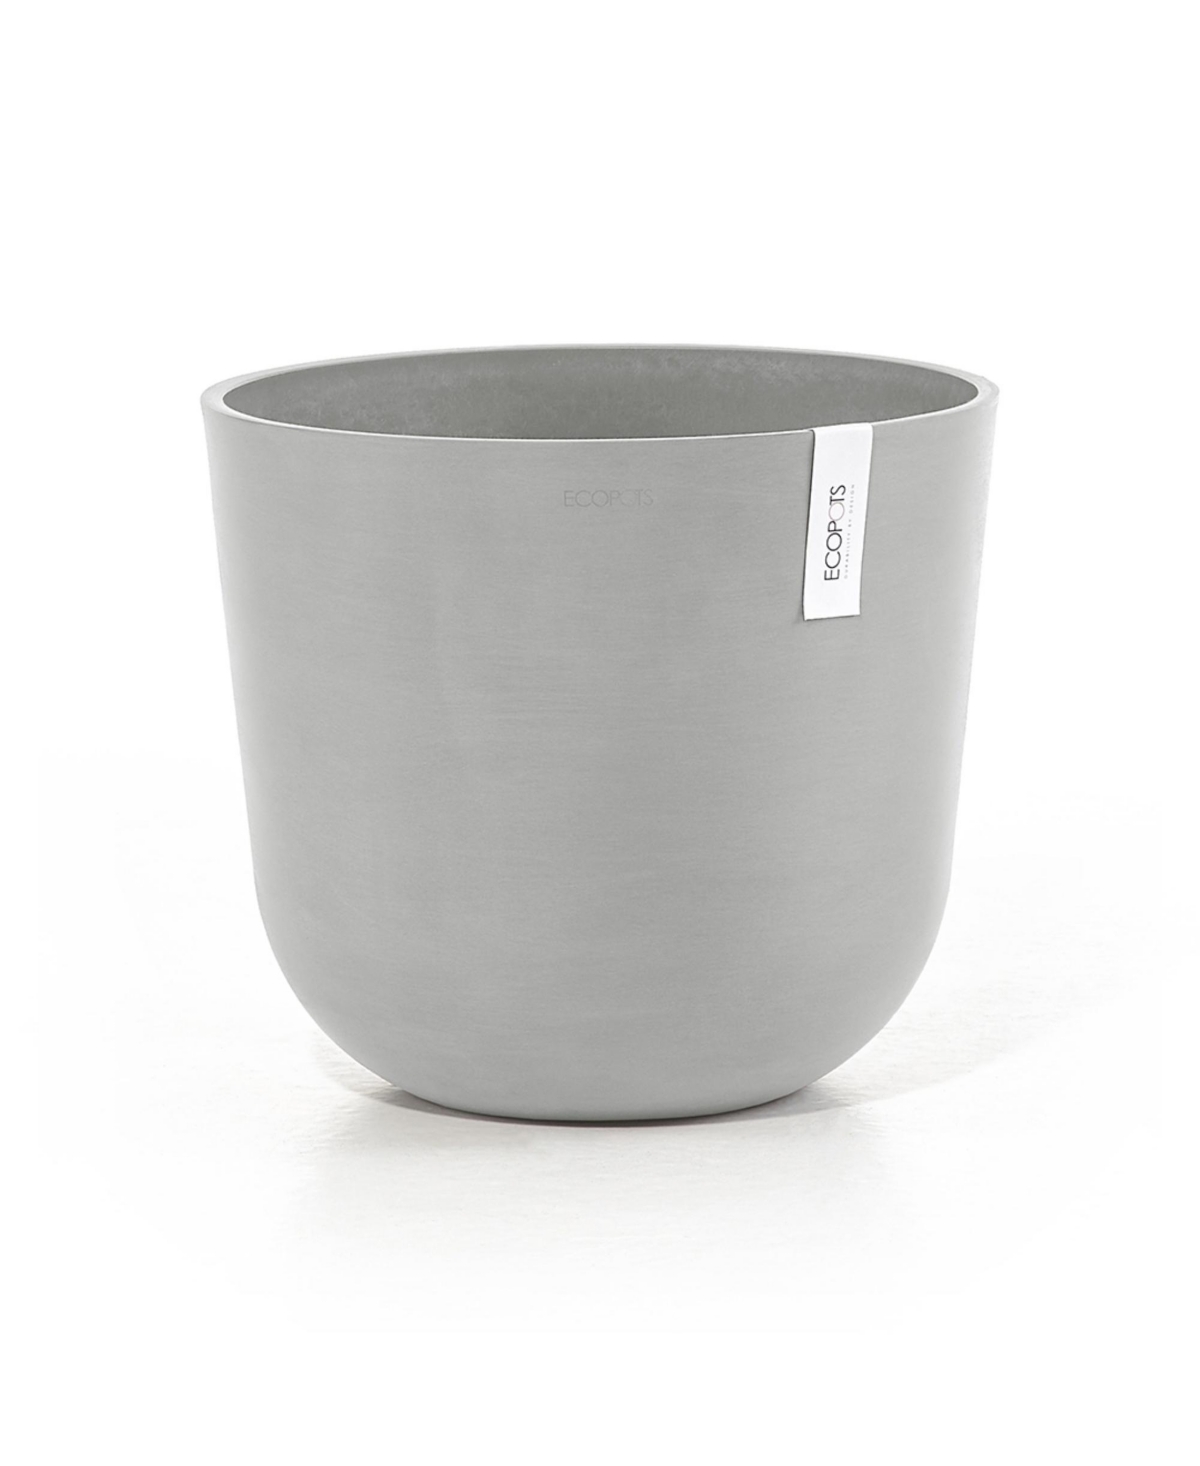 Oslo Indoor and Outdoor Modern Planter, 14in - White grey